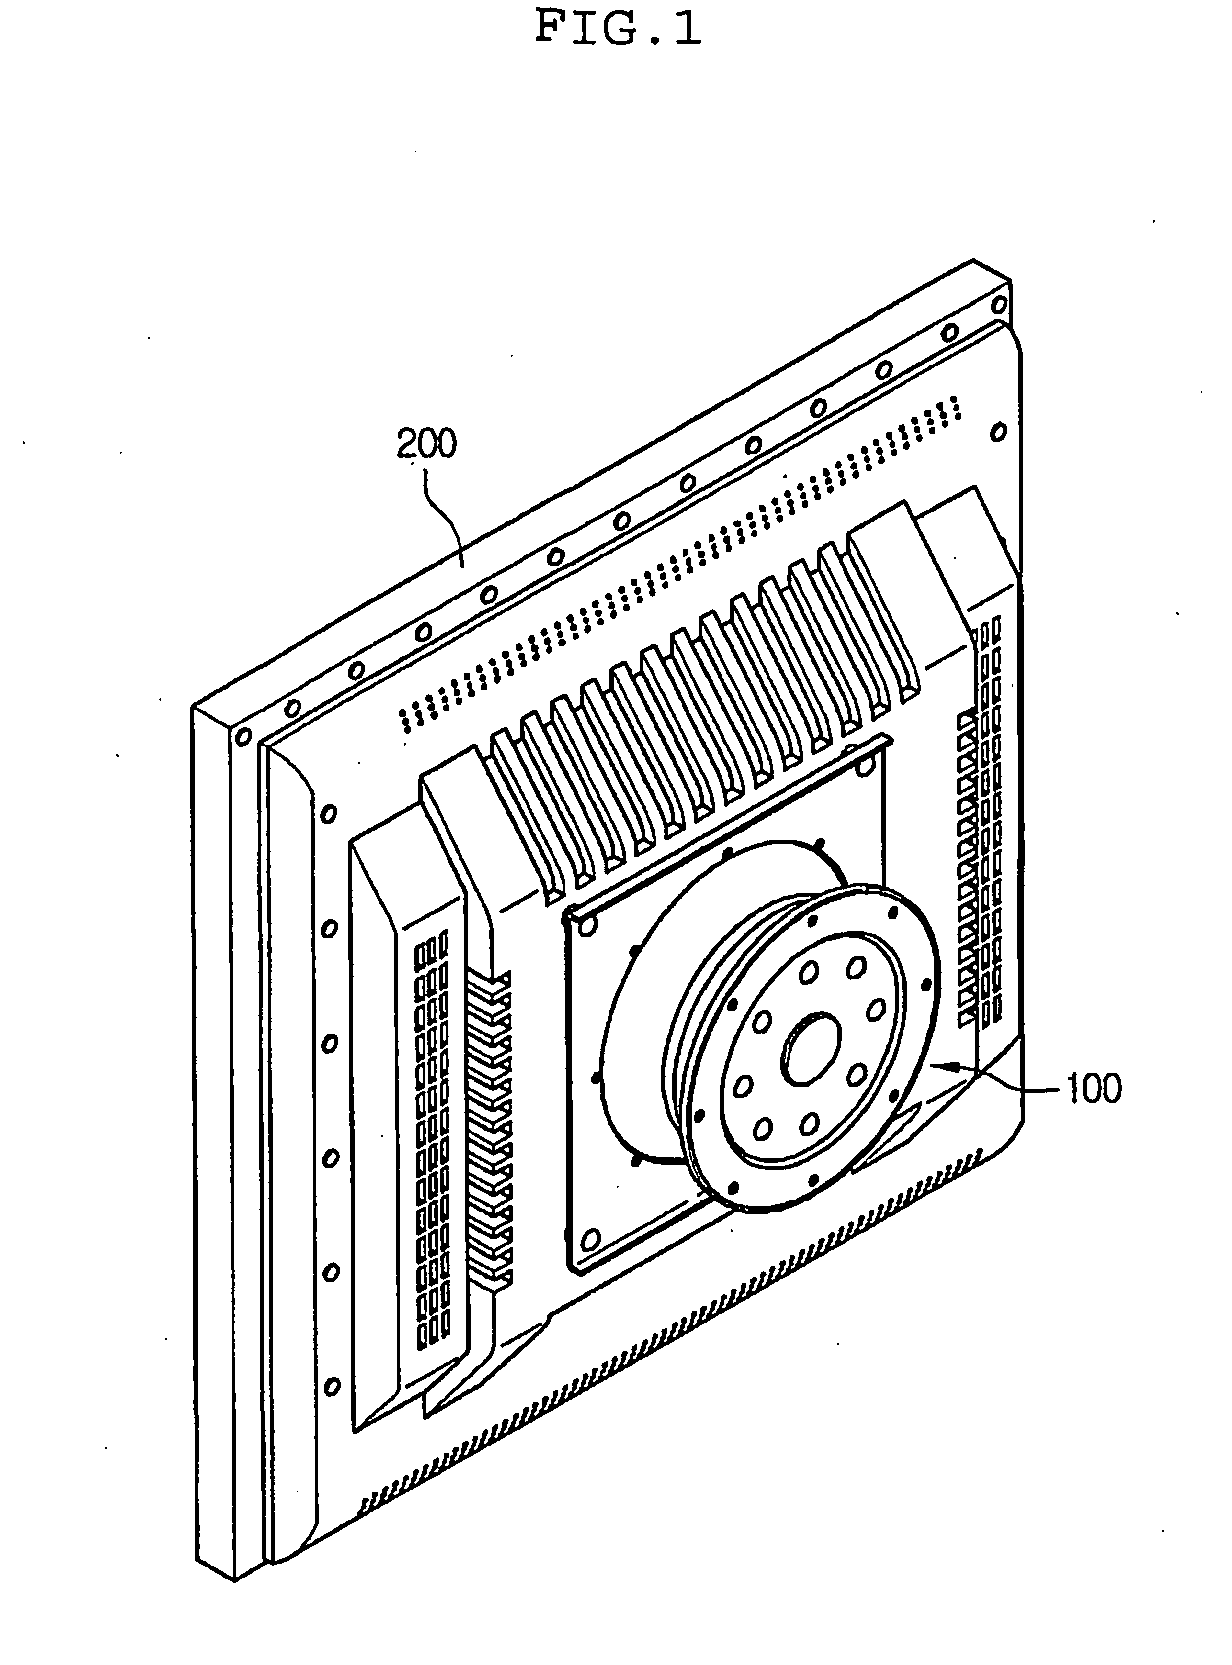 Angle regulating apparatus of a display device